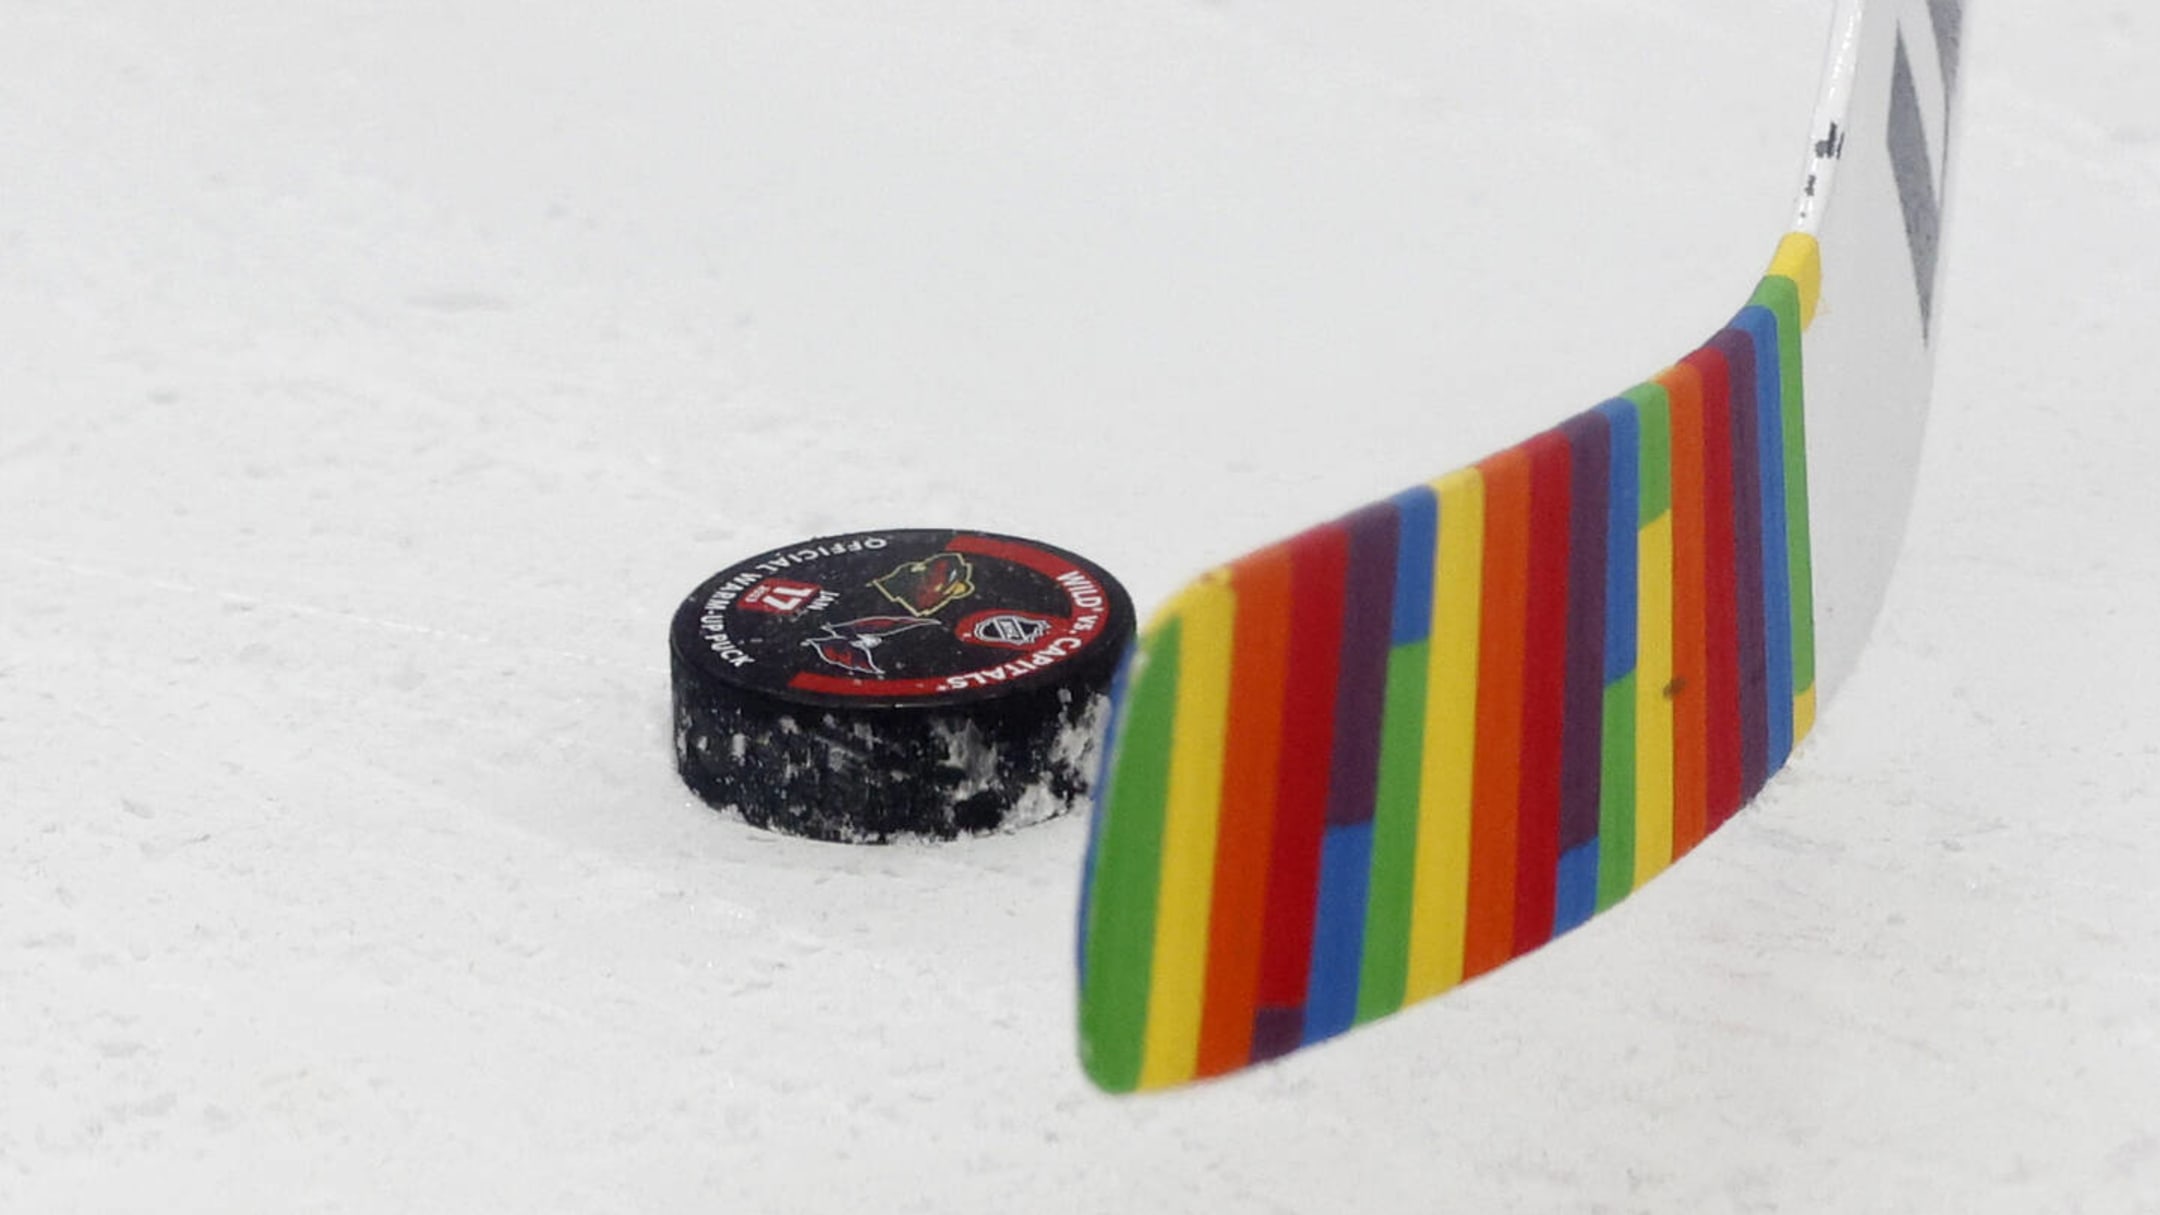 Blackhawks Reportedly Won't Wear Pride Warm-Ups Over Security Concerns For  Players